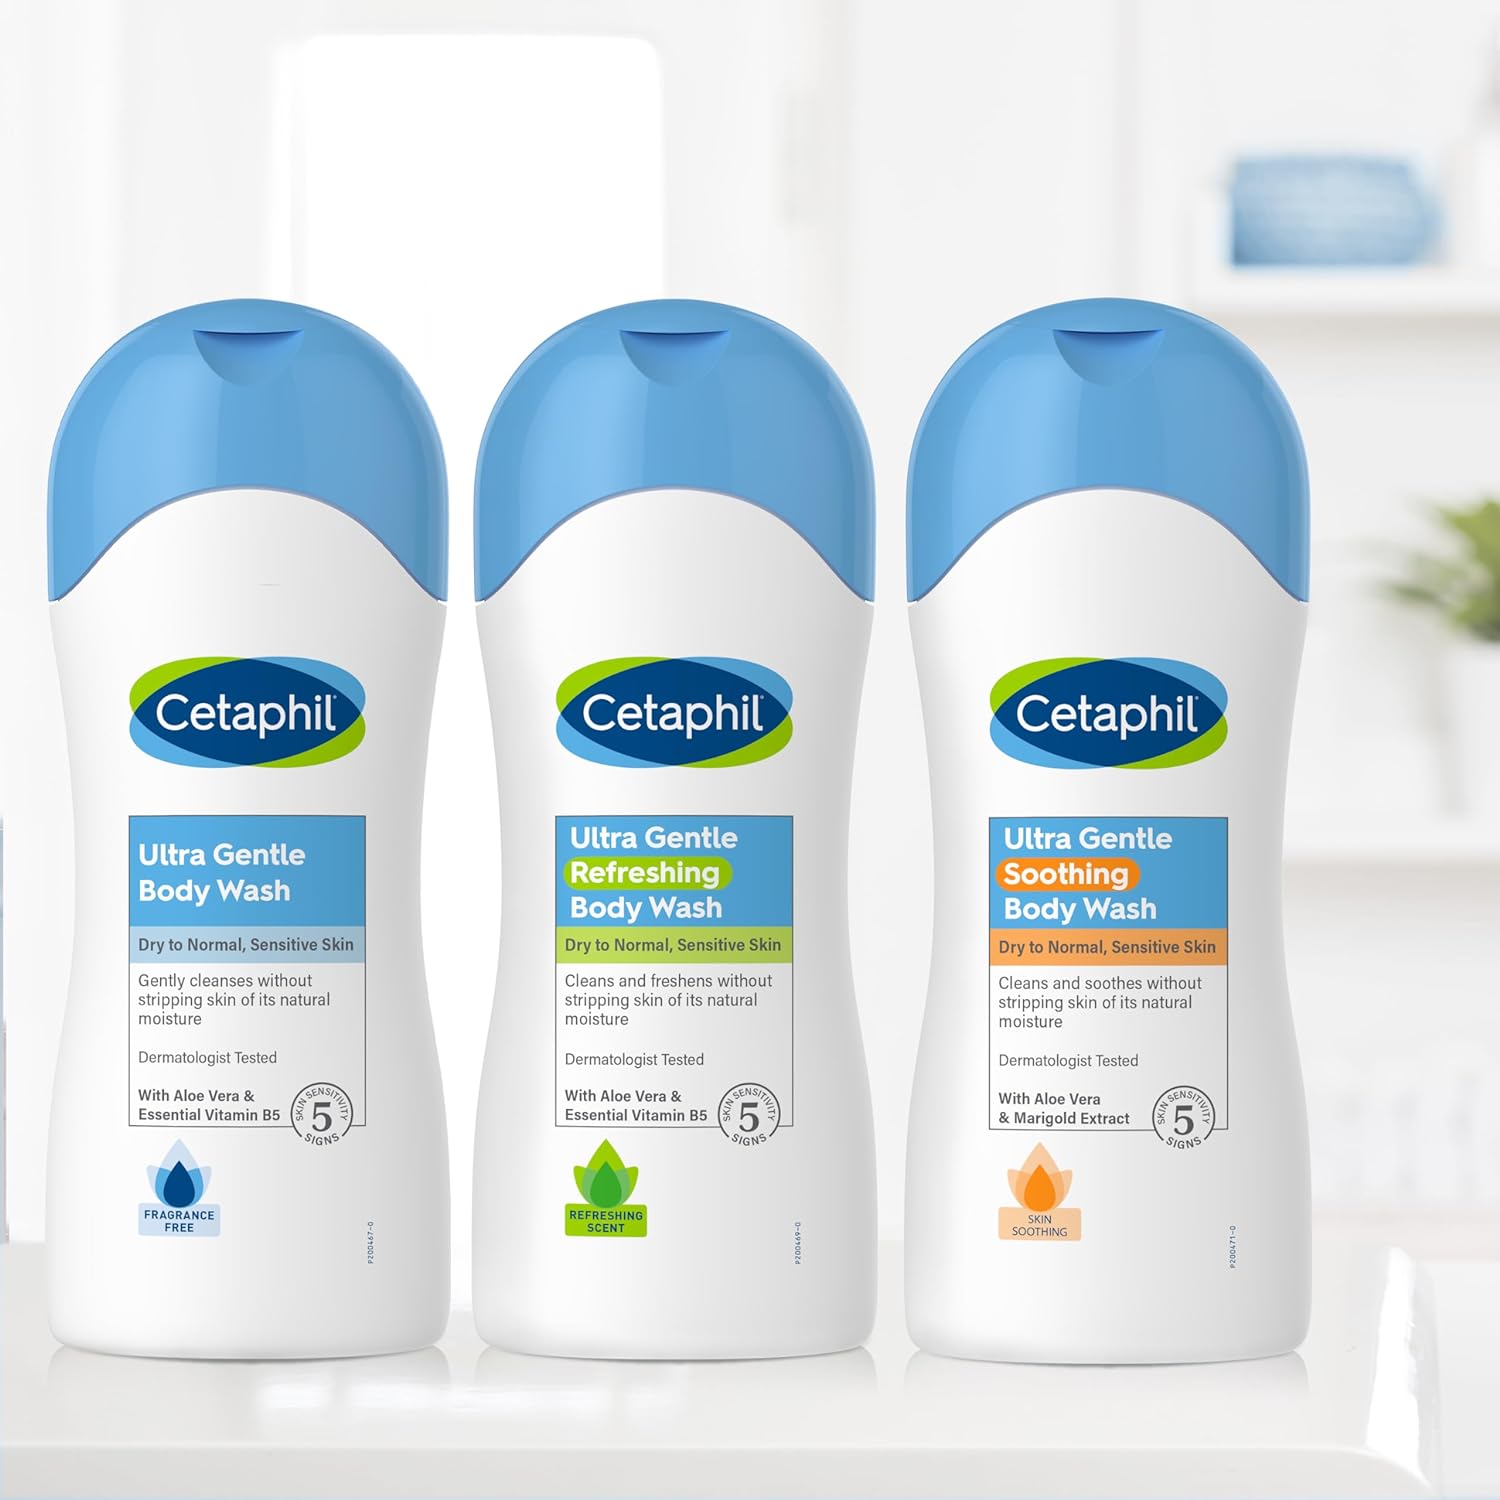 Cetaphil Ultra Gentle Refreshing Body Wash, For Dry To Normal, Sensitive Skin, Mother's Day Gifts, Aloe Vera, Vitamin B5, Hypoallergenic, Dermatologist Tested, Fragrance Free, 16.9oz Pack of 3 : Beauty & Personal Care